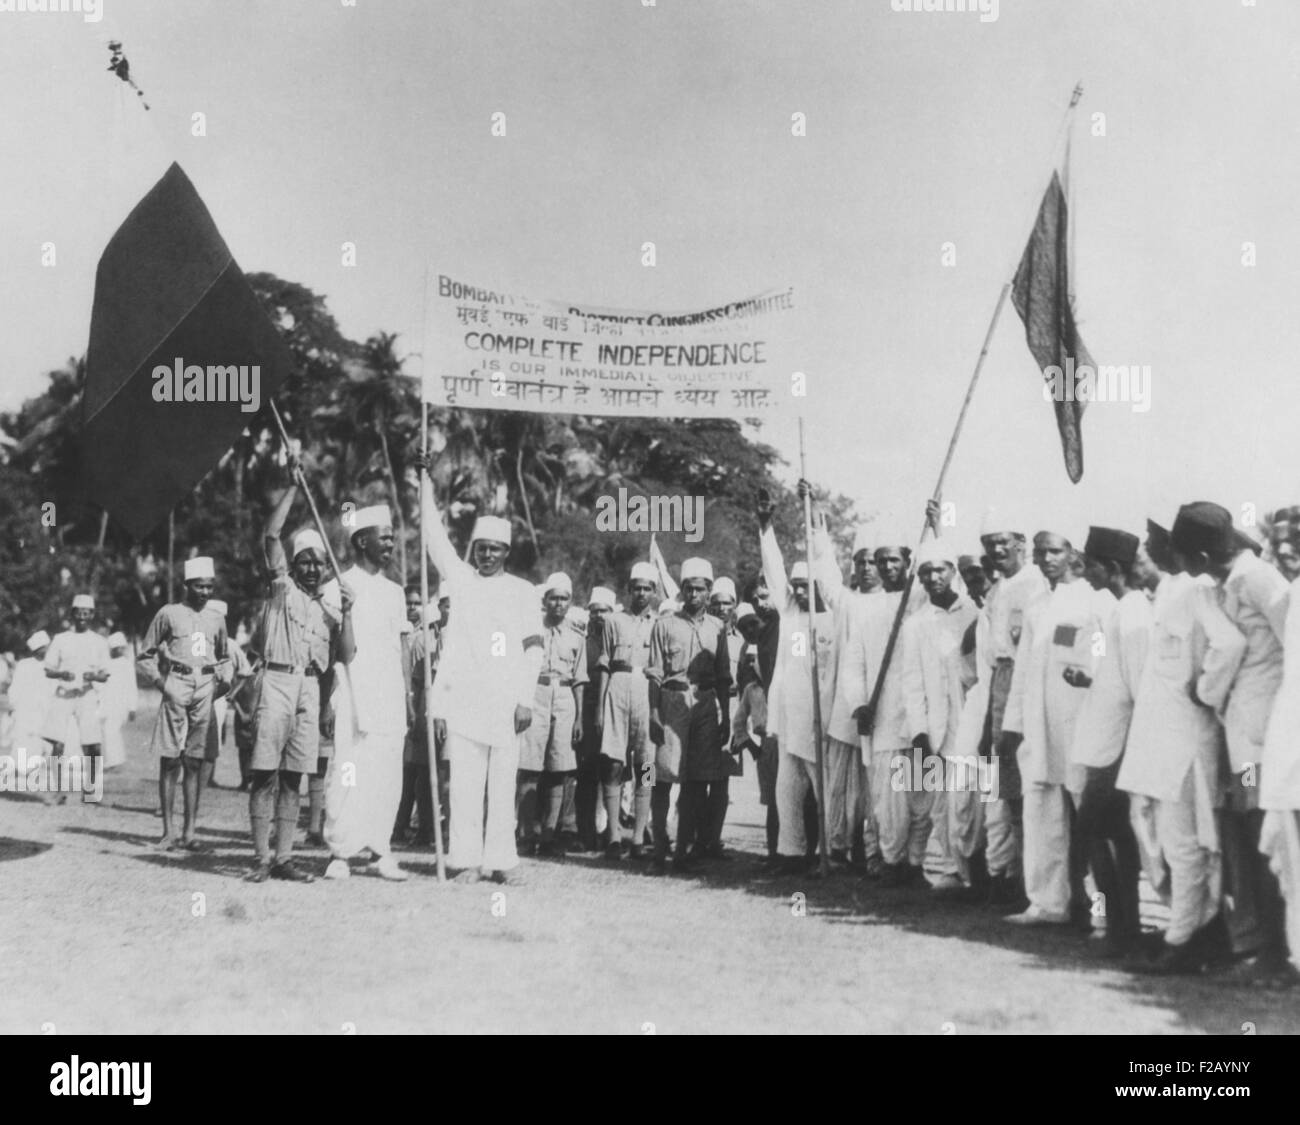 'Satyagrahi' volunteers in Bombay (Mumbai) salute the National Congress flag. India, May 1930. The term 'satyagraha' was developed by Mahatma Gandhi, loosely translated as 'insistence on truth'. These protesters hold a sign, 'Complete Independence is Our Immediate Objective.' (CSU 2015 9 714) Stock Photo